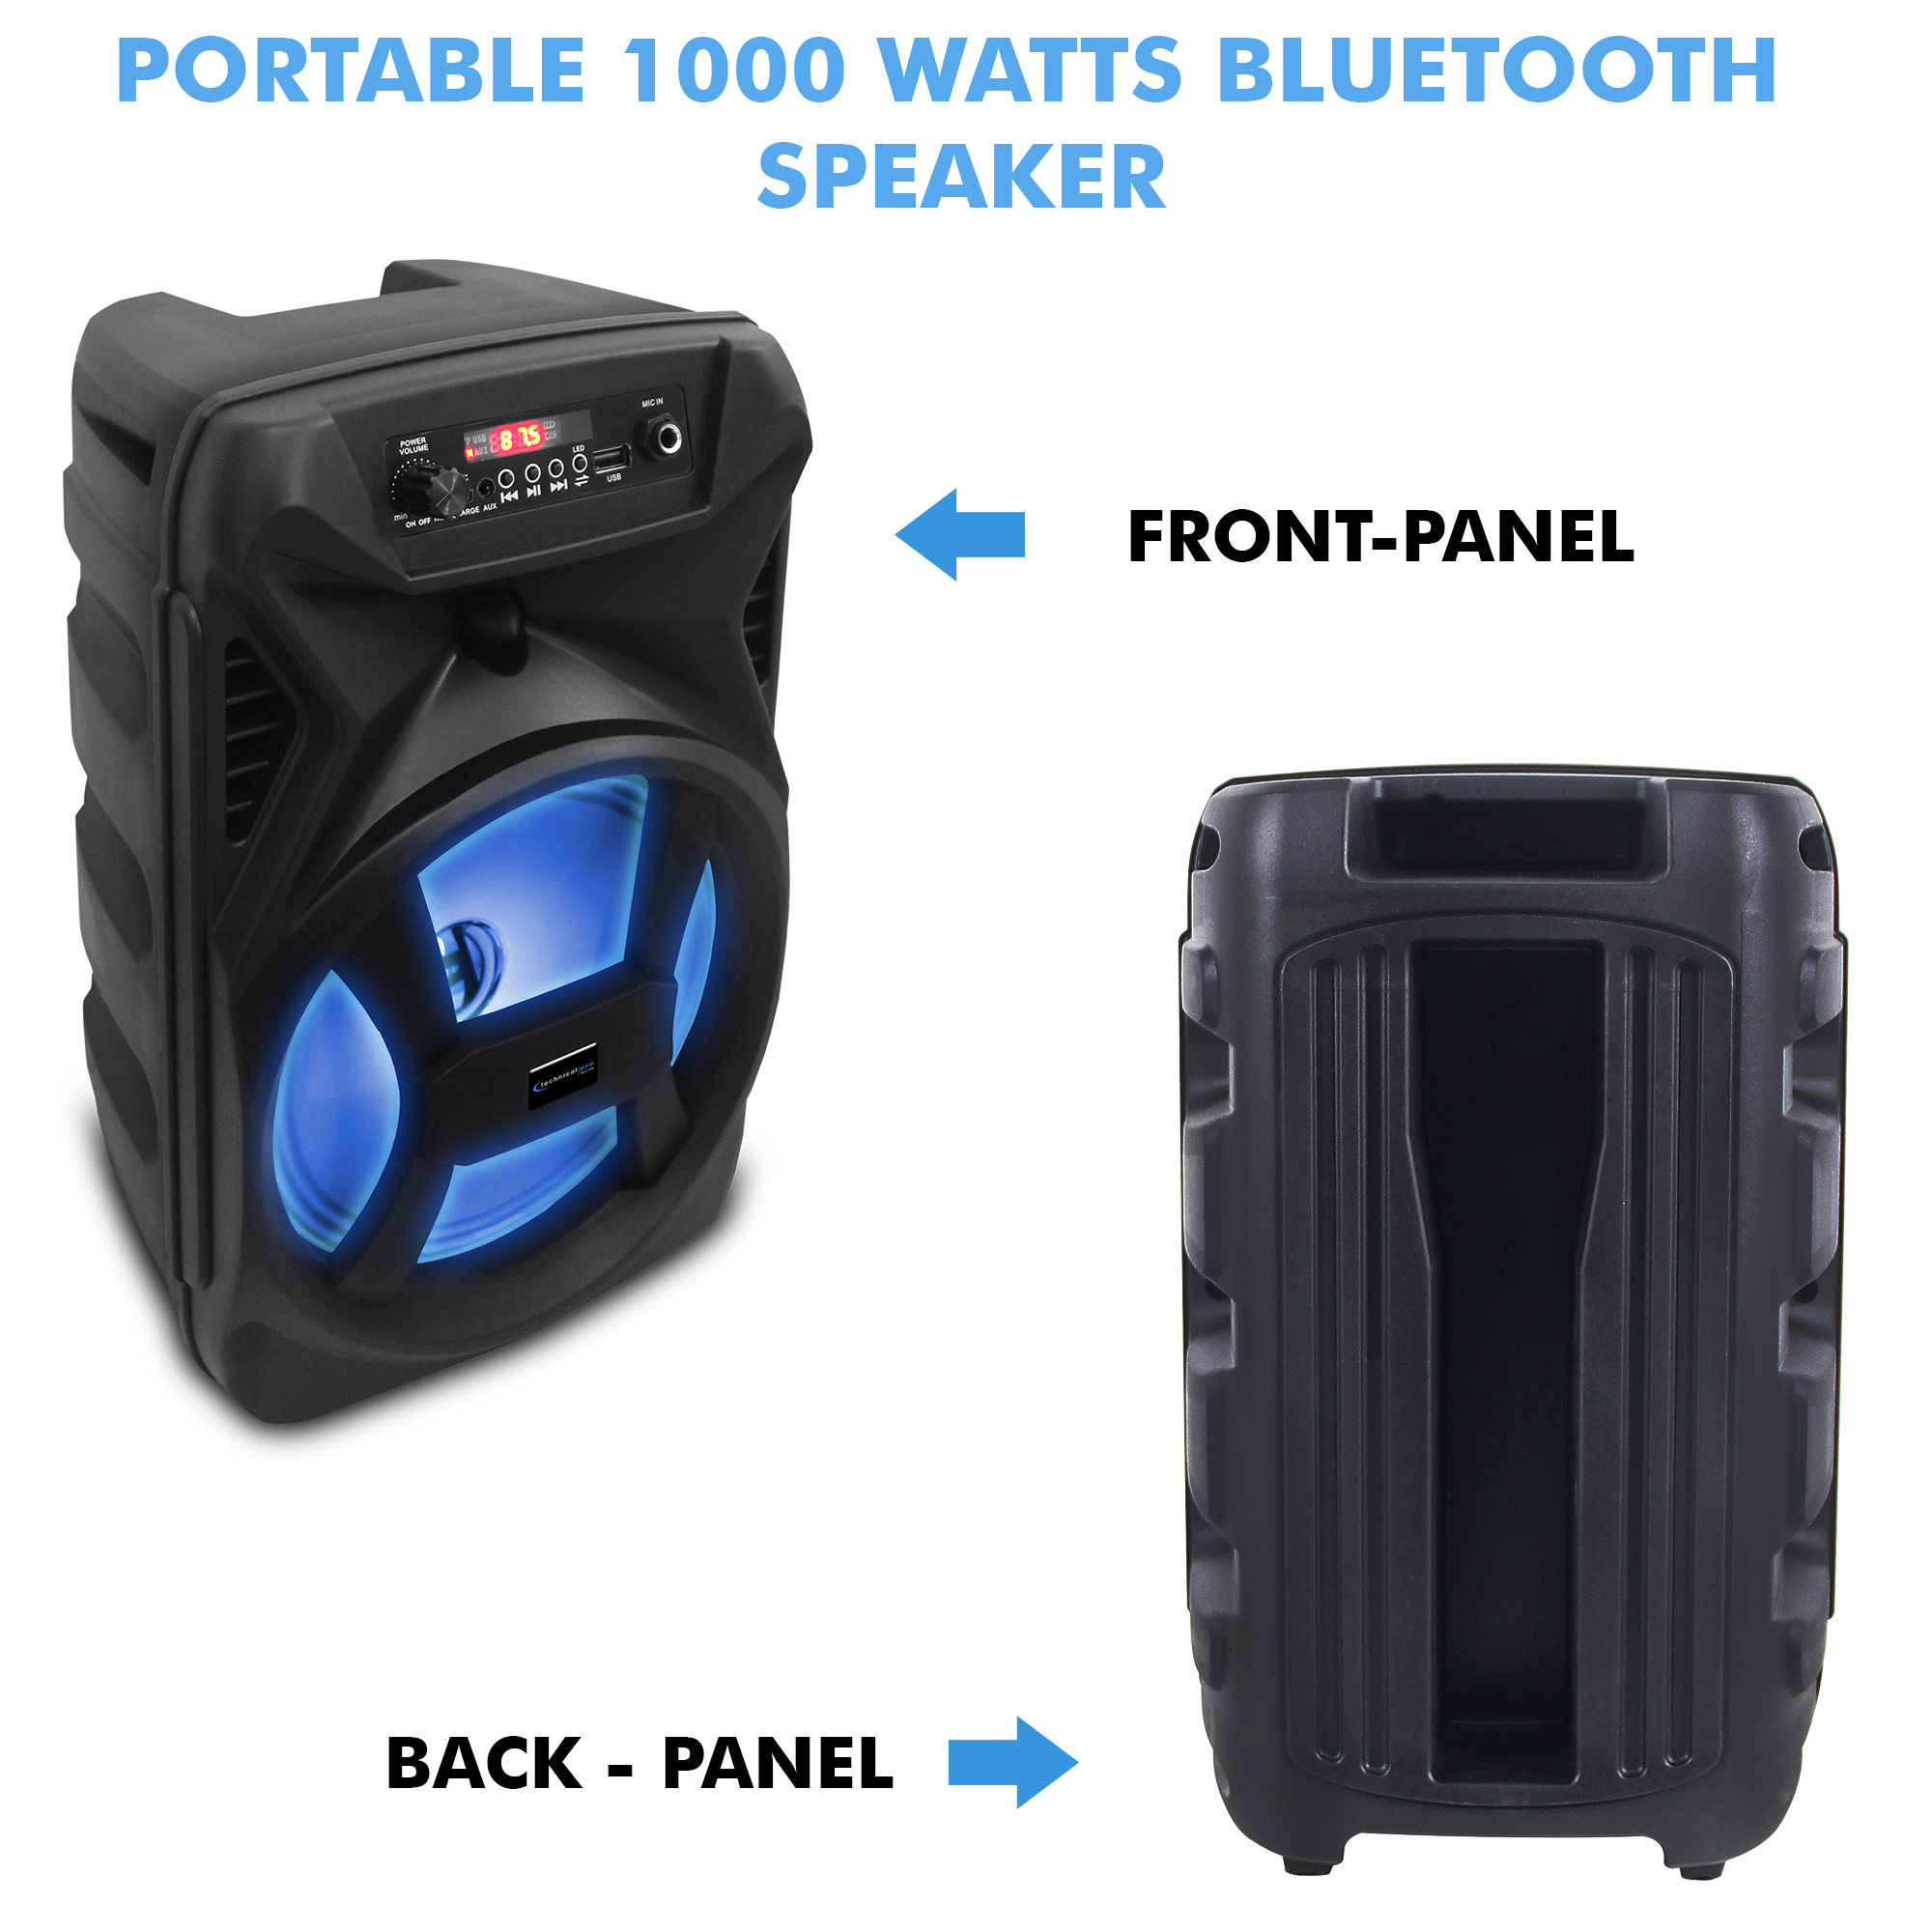 Technical Pro 8" Portable 500 Watts Bluetooth Speaker w/ Woofer and Tweeter, Festival PA LED Speaker, USB Card Input, - image 2 of 7